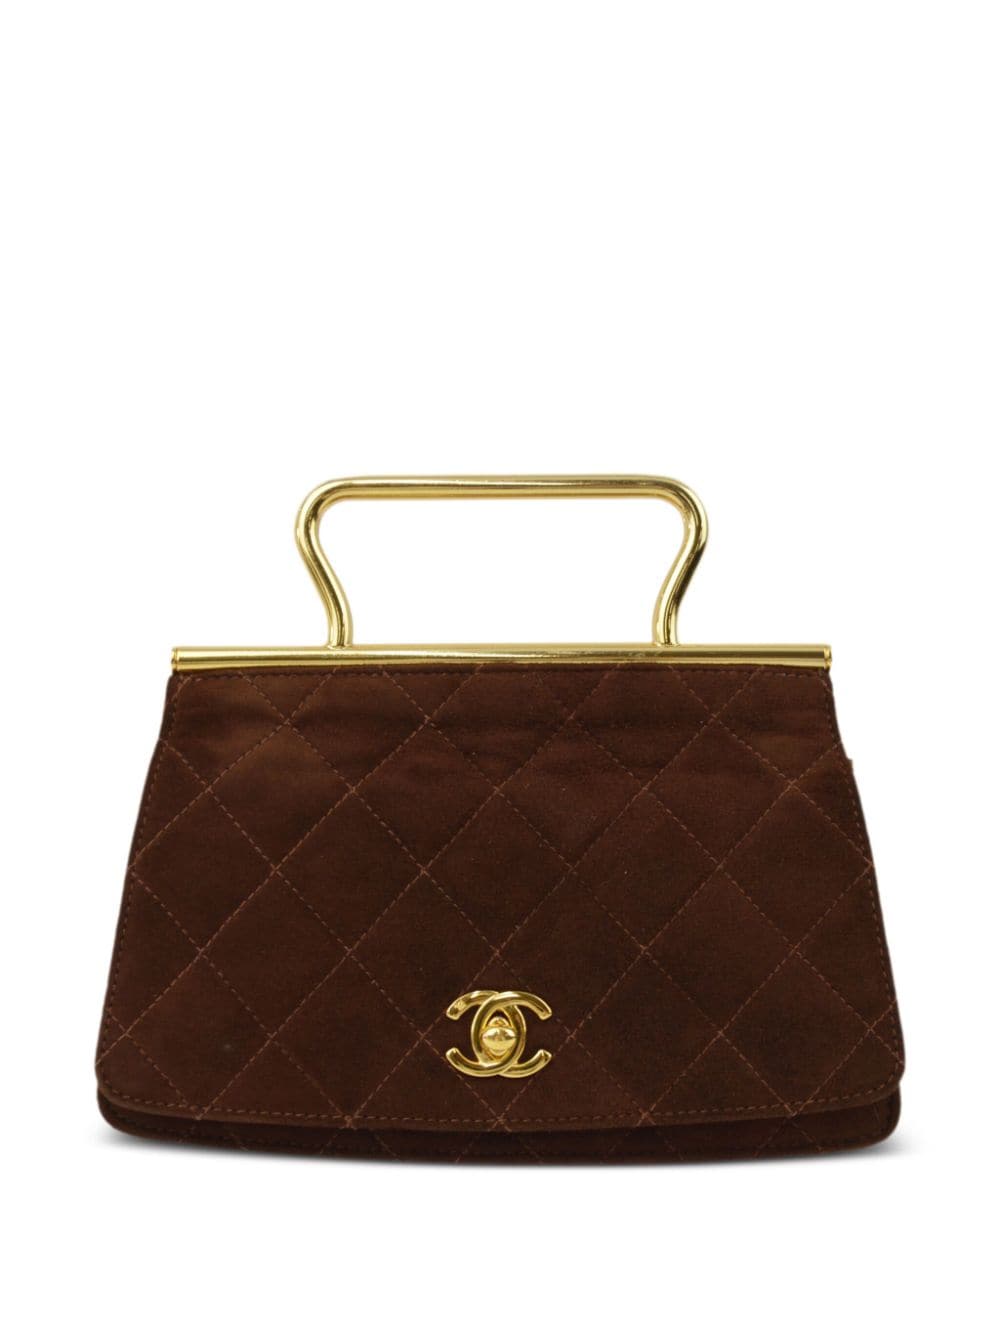 Pre-owned Chanel 1995 Cc Turn-lock Diamond-quilted Handbag In Brown